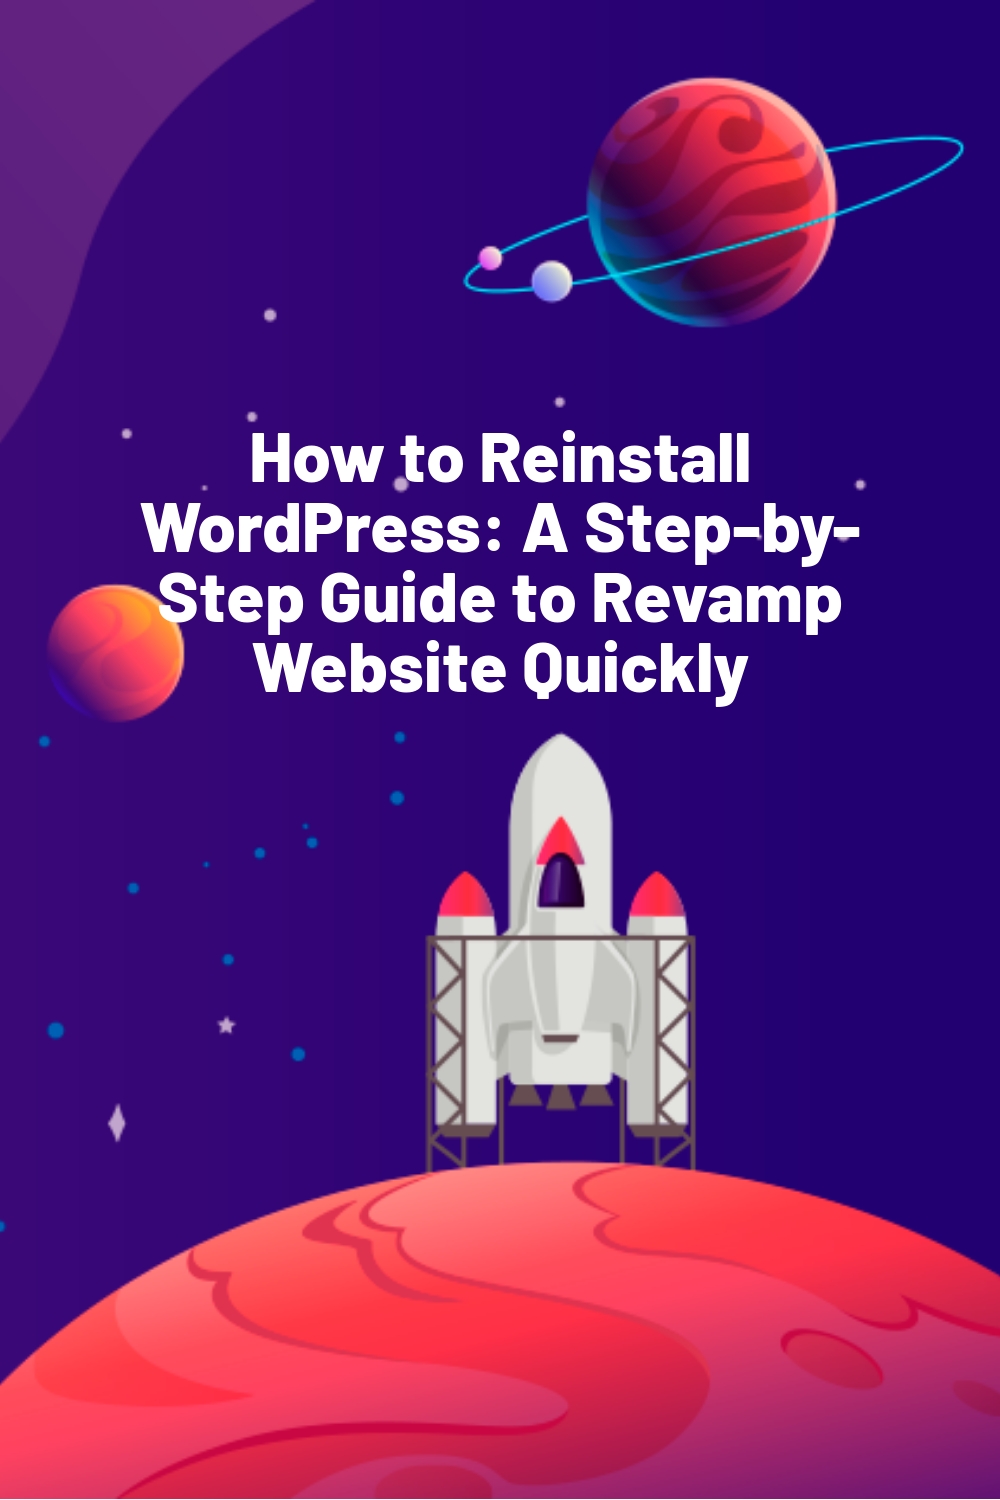 How to Reinstall WordPress: A Step-by-Step Guide to Revamp Website Quickly